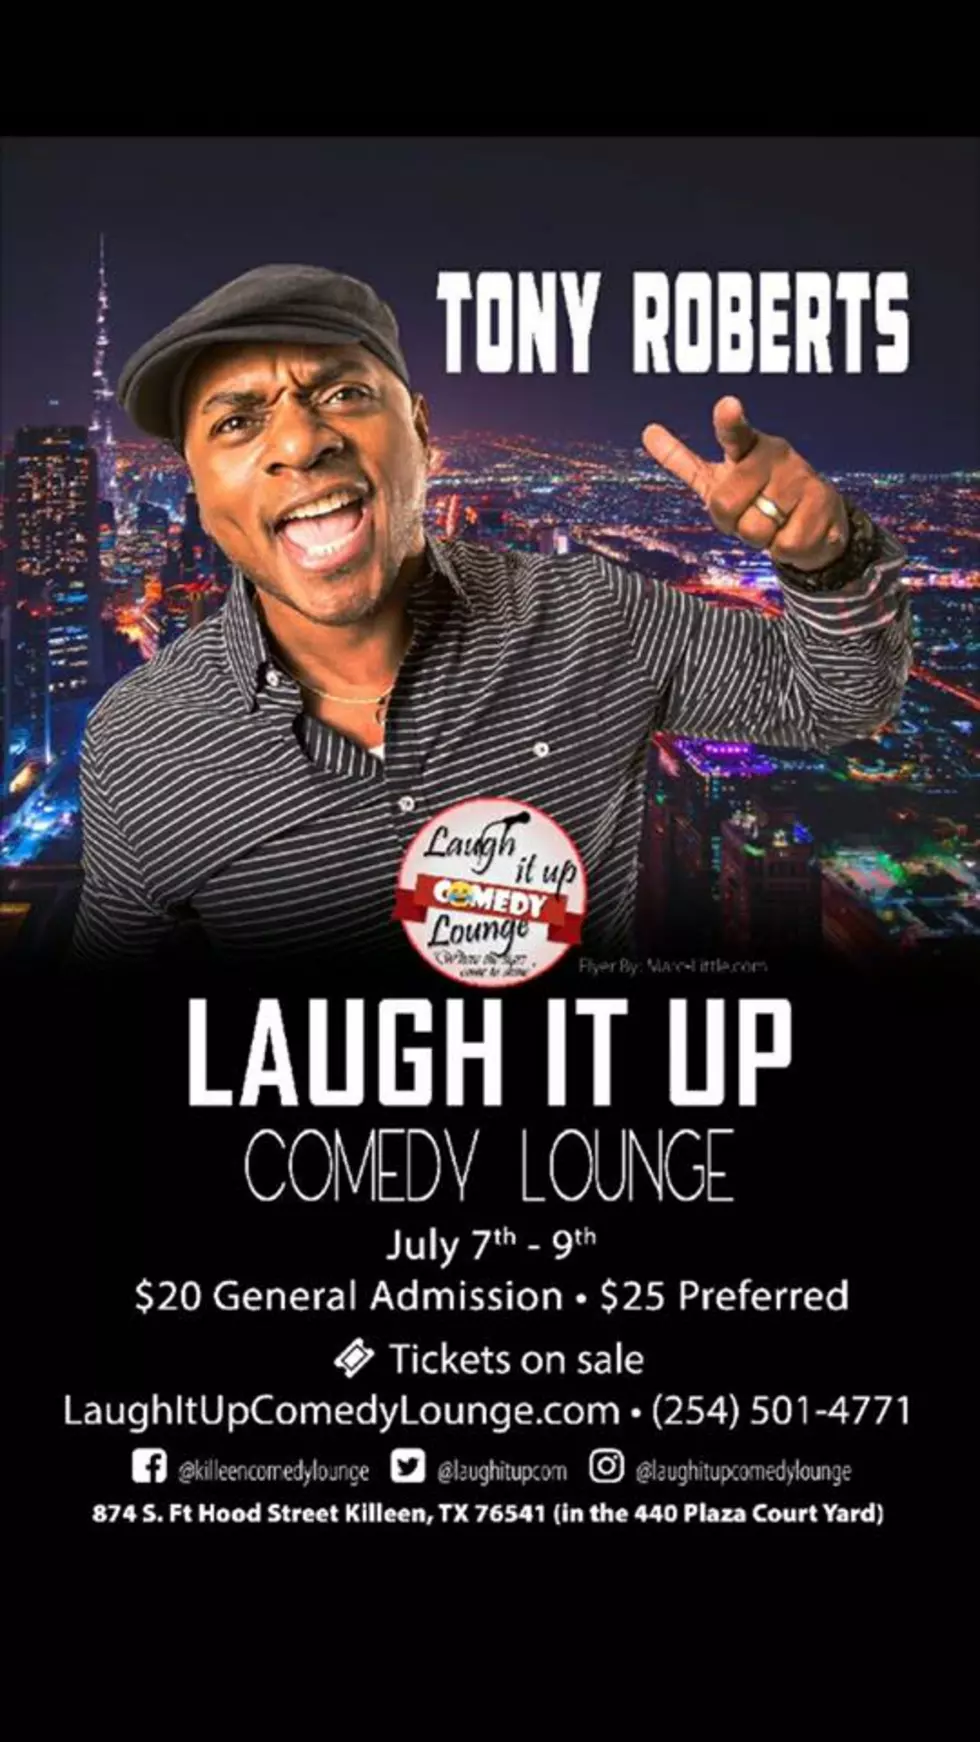 Get On The Kiss List To See Tony Roberts At The Laugh It Up Comedy Lounge